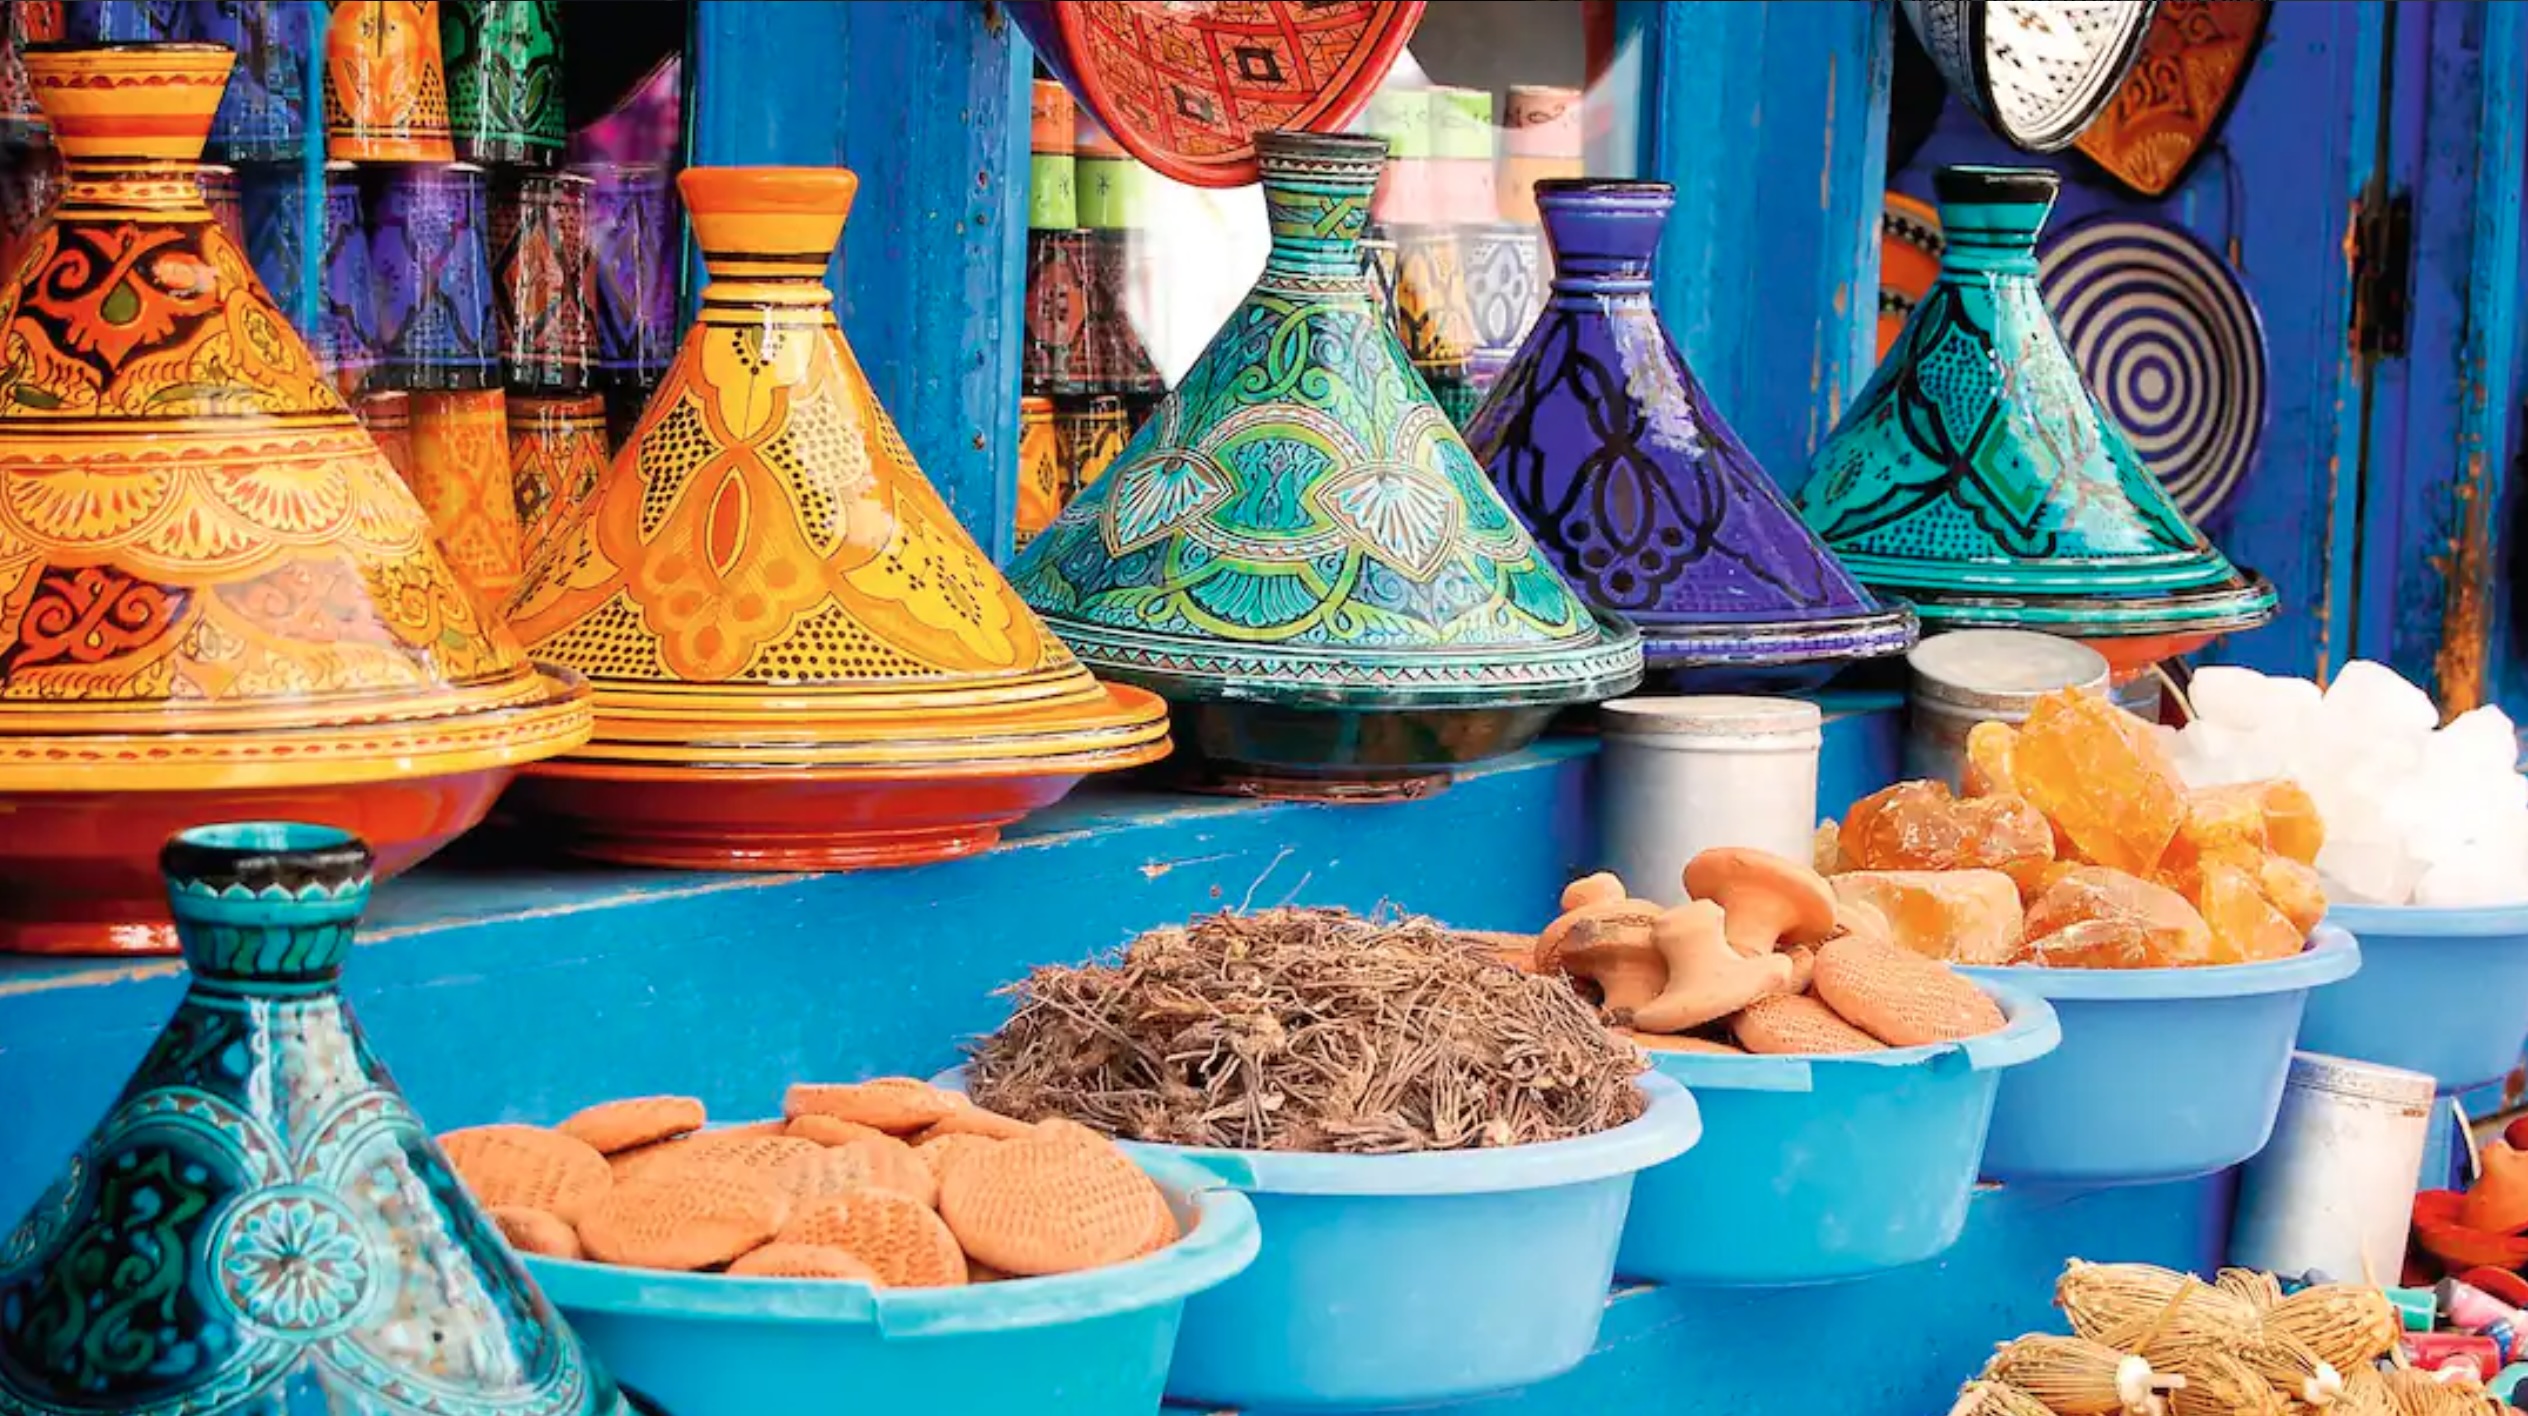 Visit the souks in Marrakech and pick up a bargain